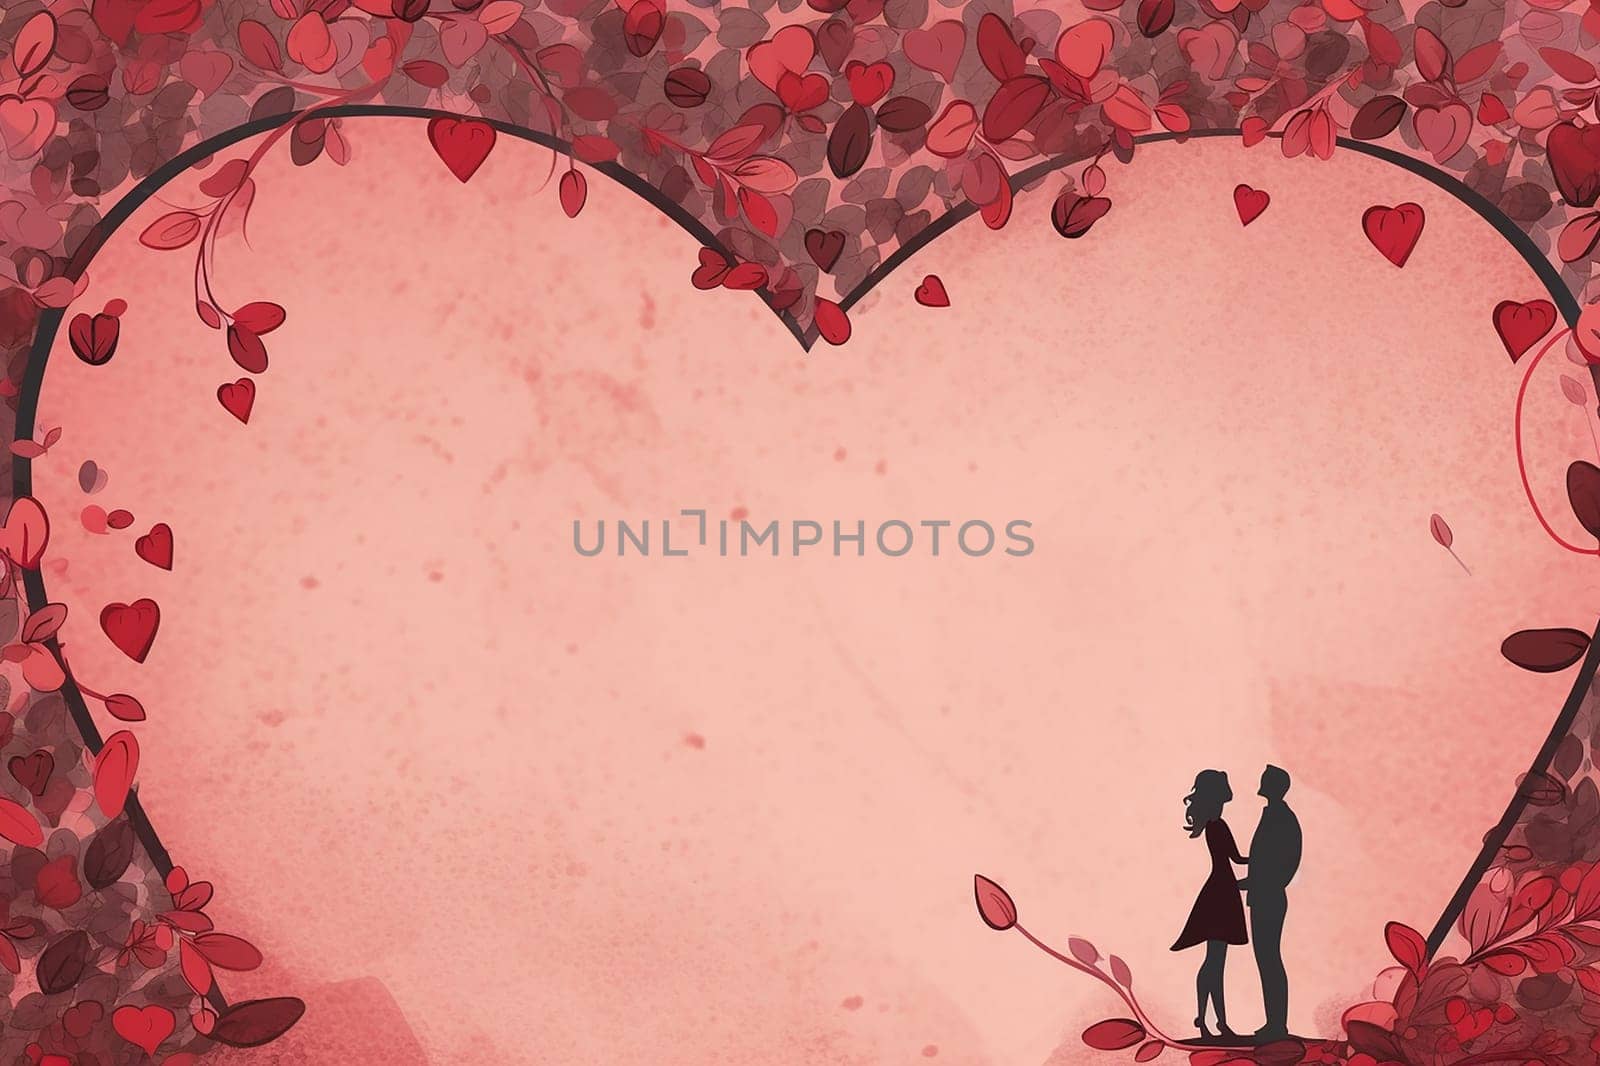 Silhouetted couple kissing under heart-shaped tree adorned with red leaves.